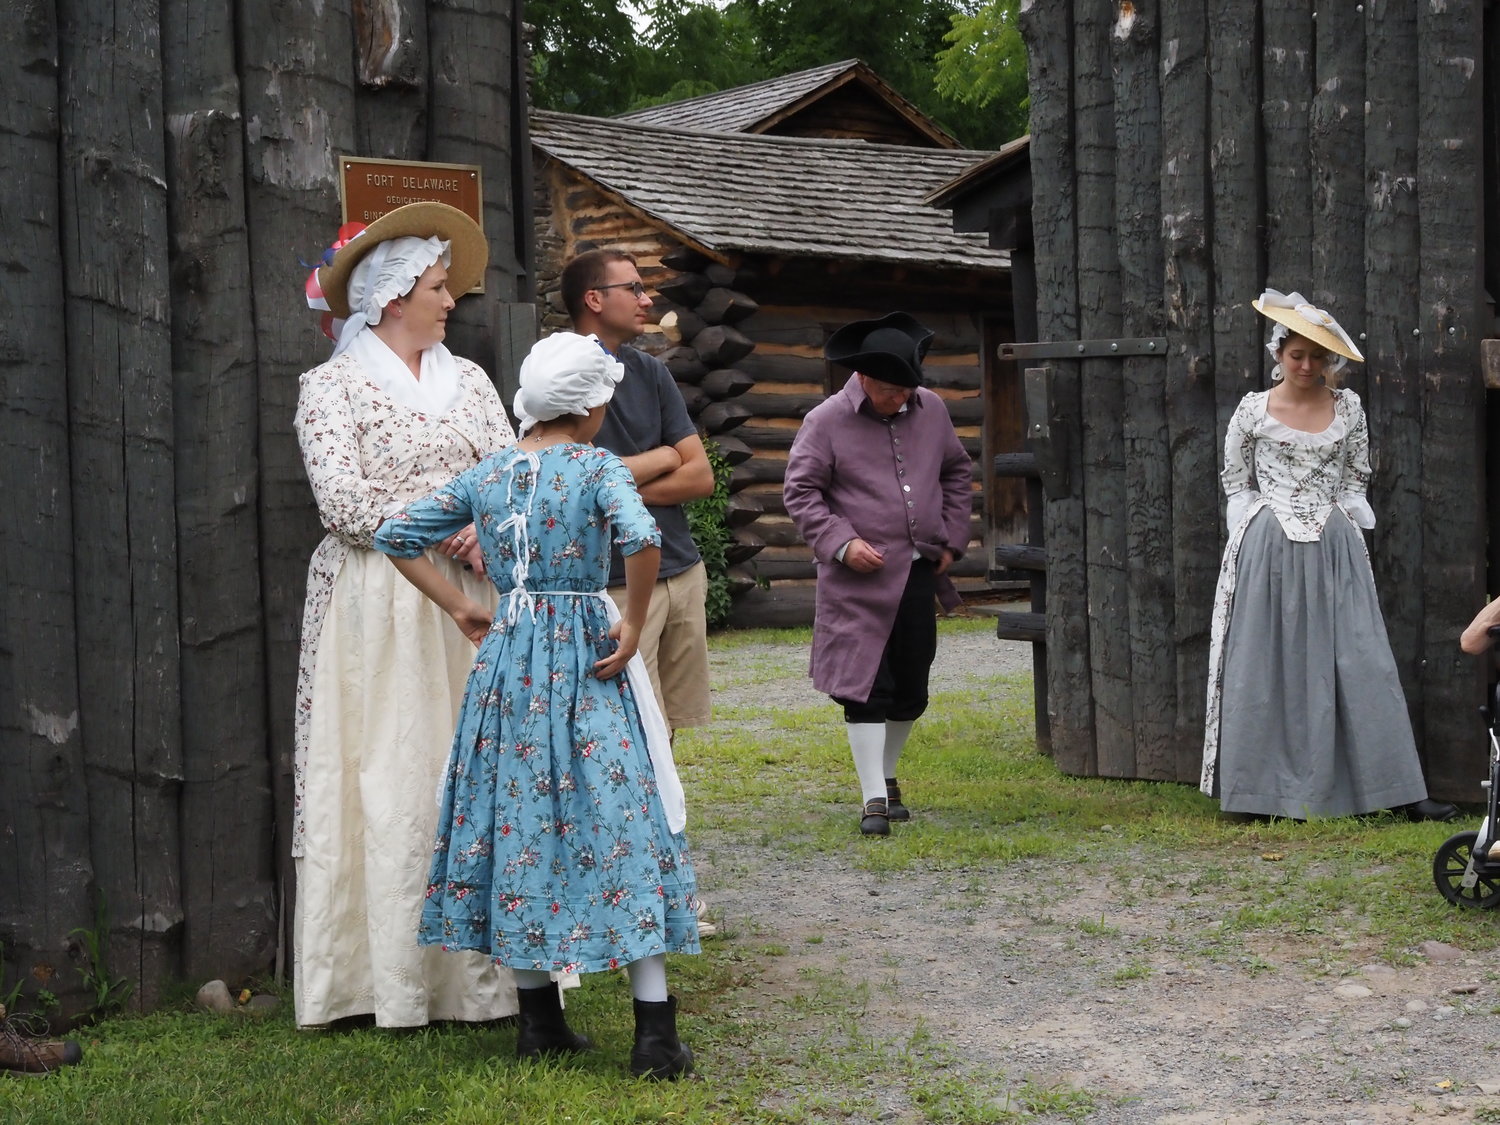 Katrina Chellis, left, and her daughters Mary and Elizabeth, dressed in 18th century style gowns, await the courier from Philadelphia (portrayed by John Conway).